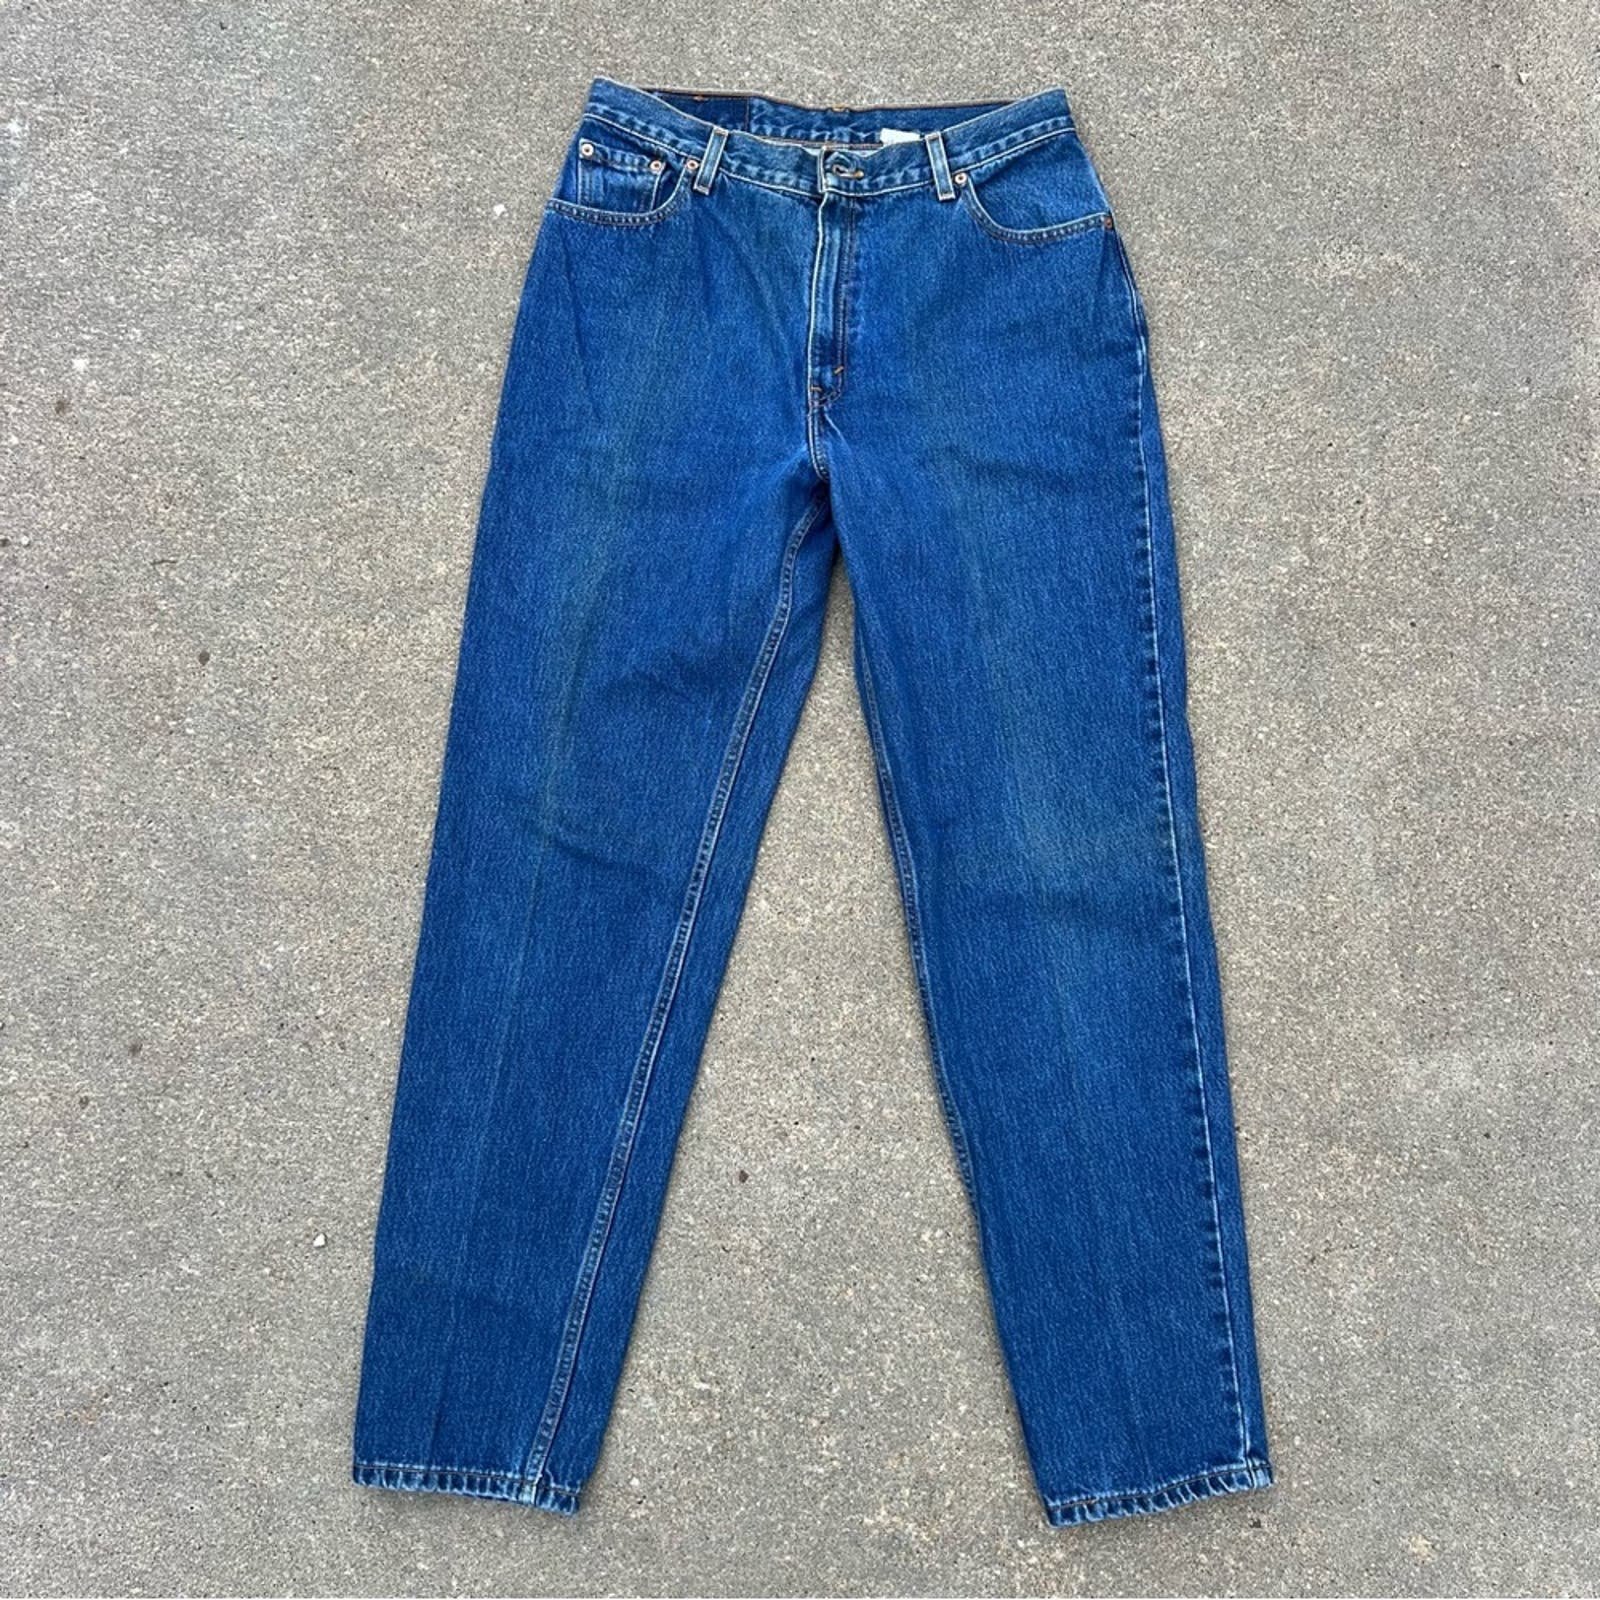 Popular Vintage 90s Levi’s 550 relaxed fit tapered leg mom jeans Ladies 14 REG LONG nL0ChYCK2 Discount